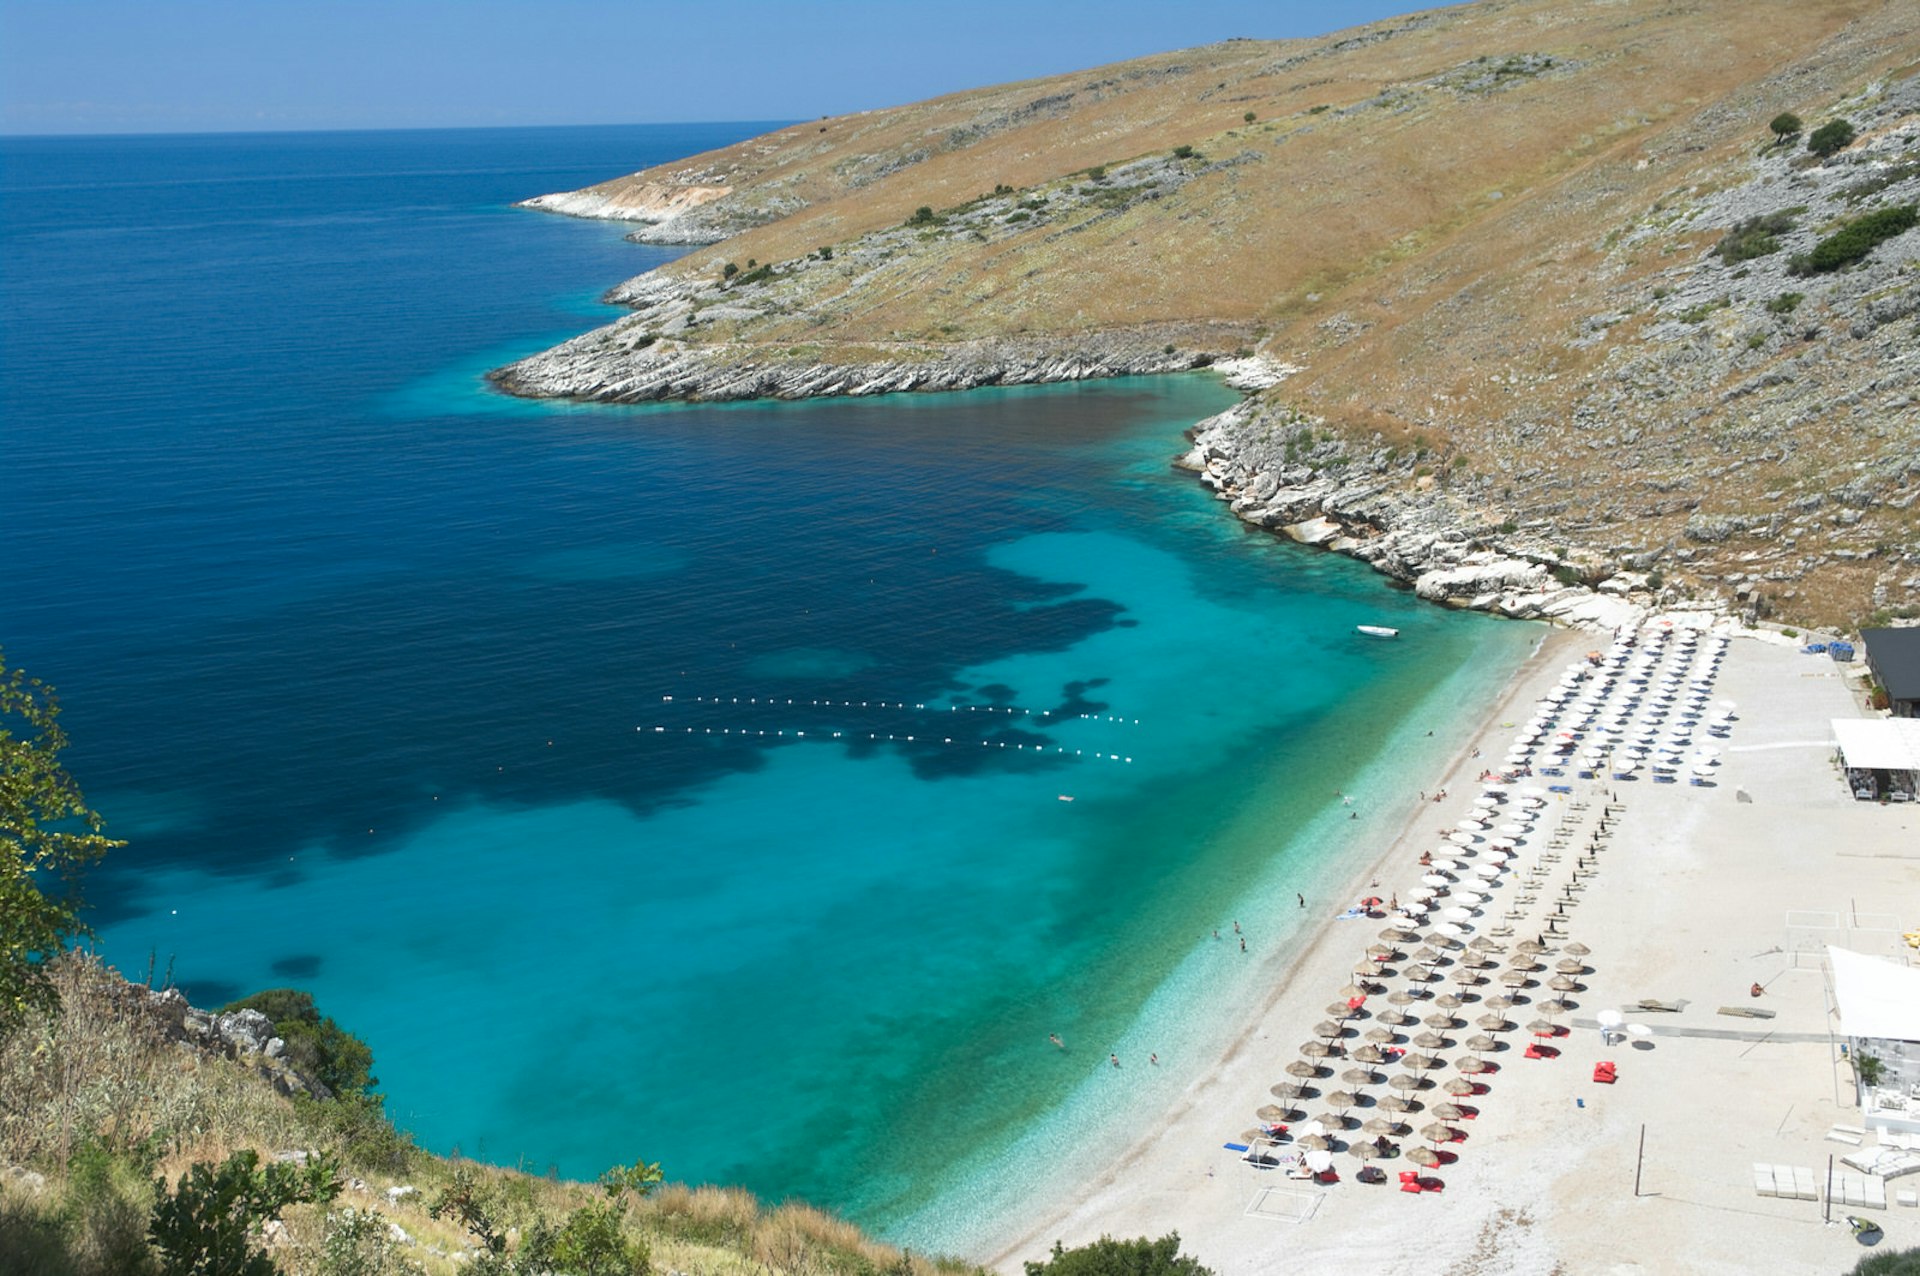 High-angle view of Llamani Beach near Himare with rows of sun loungers lining the sand